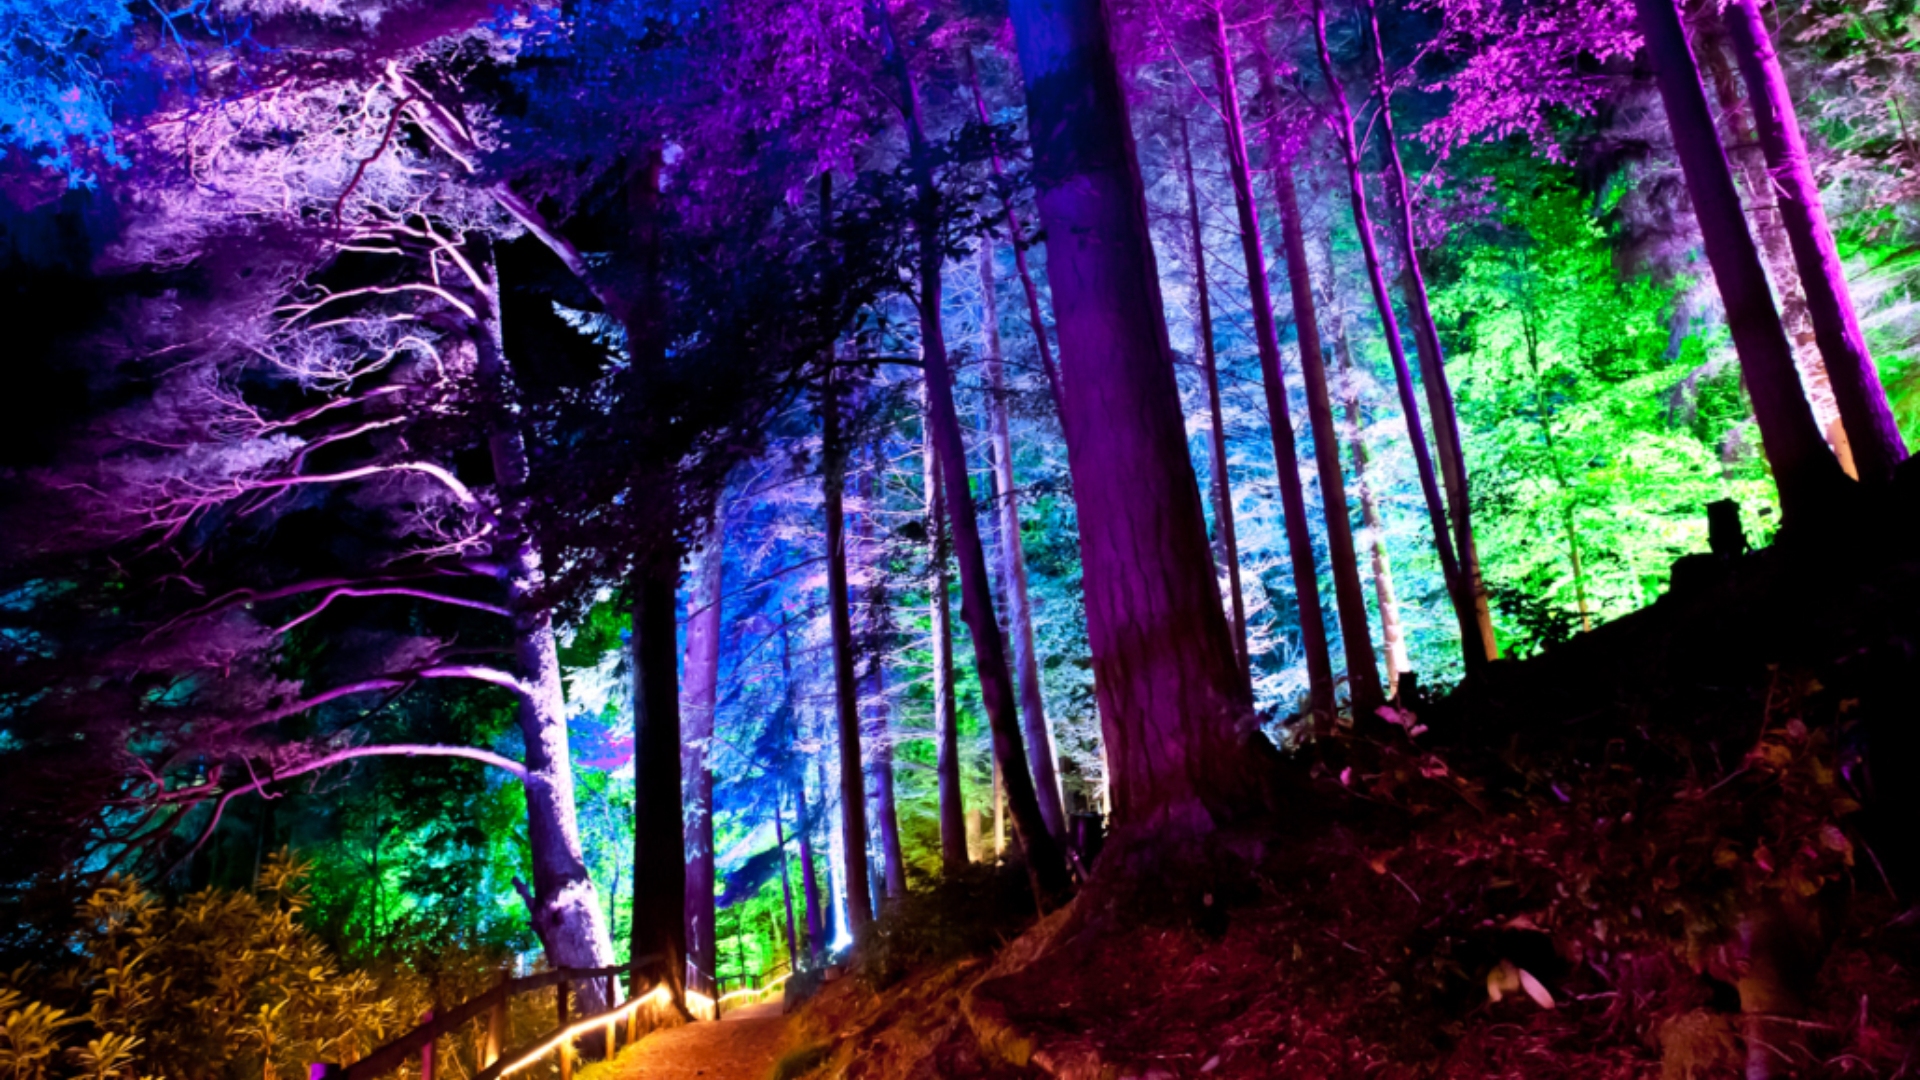 More than 80,000 people a year visit the Enchanted Forest sound and light show. 